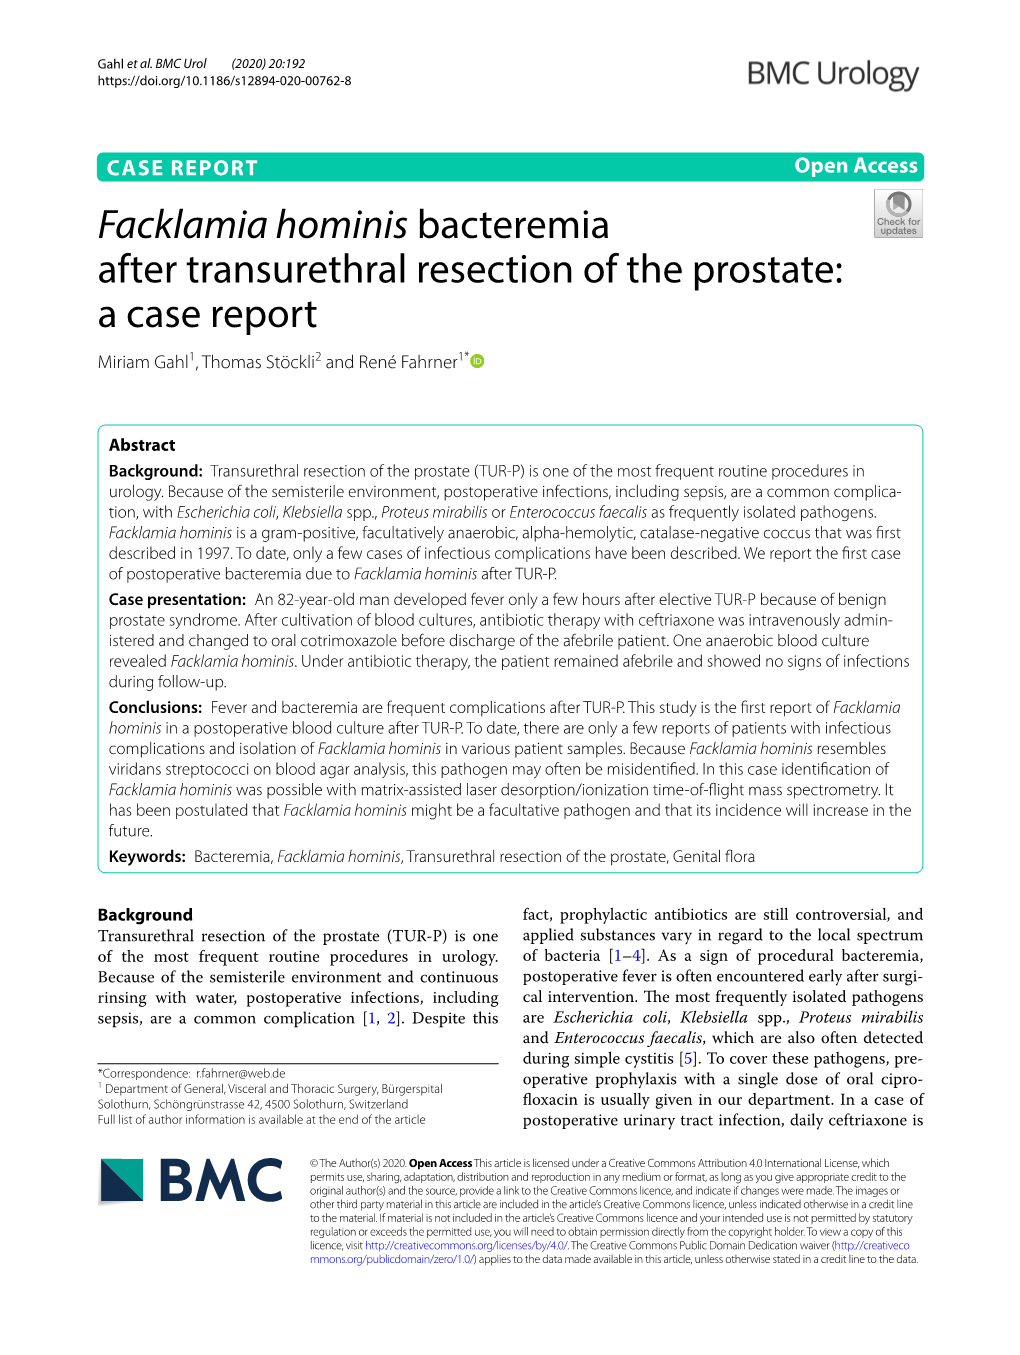 Facklamia Hominis Bacteremia After Transurethral Resection of the Prostate: a Case Report Miriam Gahl1, Thomas Stöckli2 and René Fahrner1*